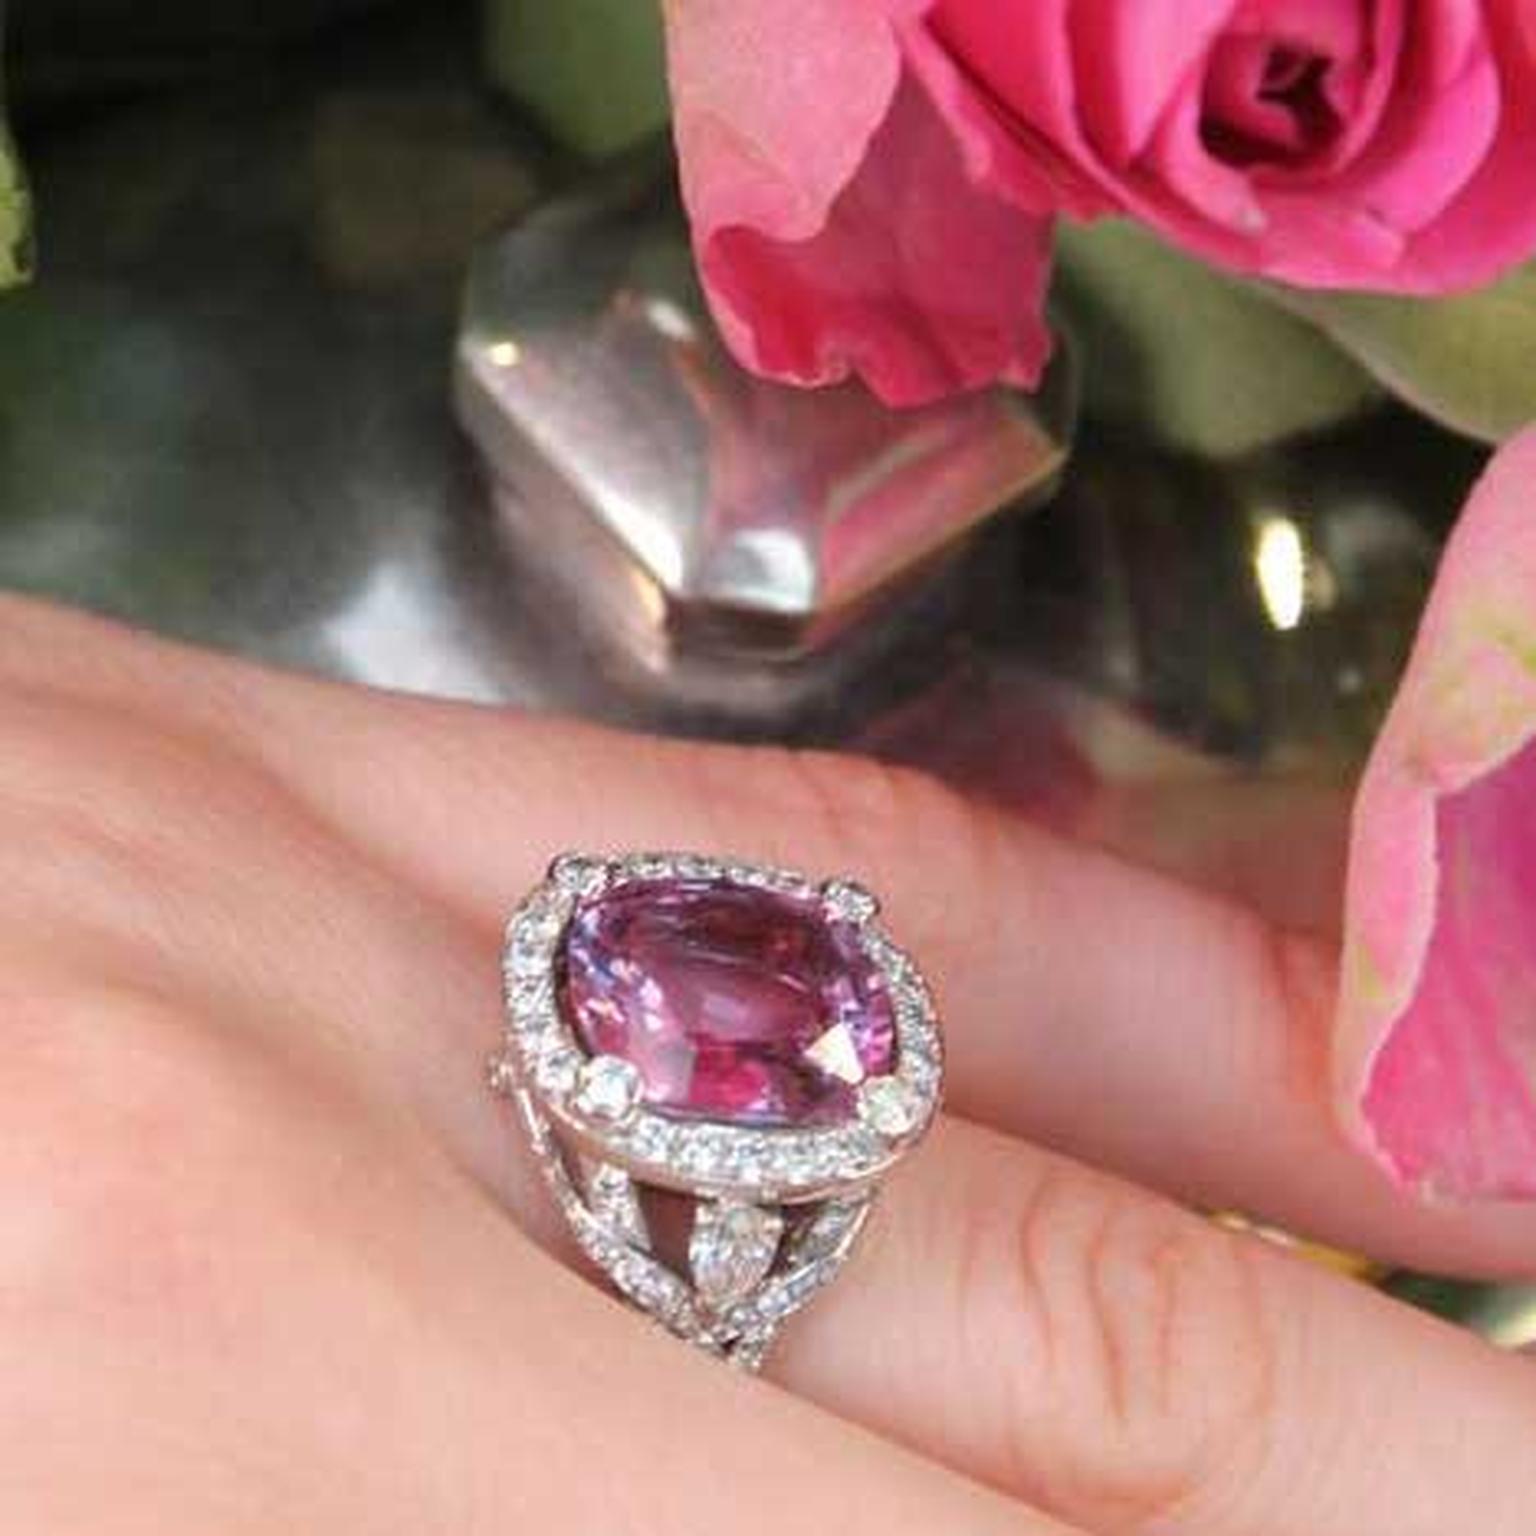 Comment on Lady Gaga pink sapphire engagement ring | The Jewellery Editor